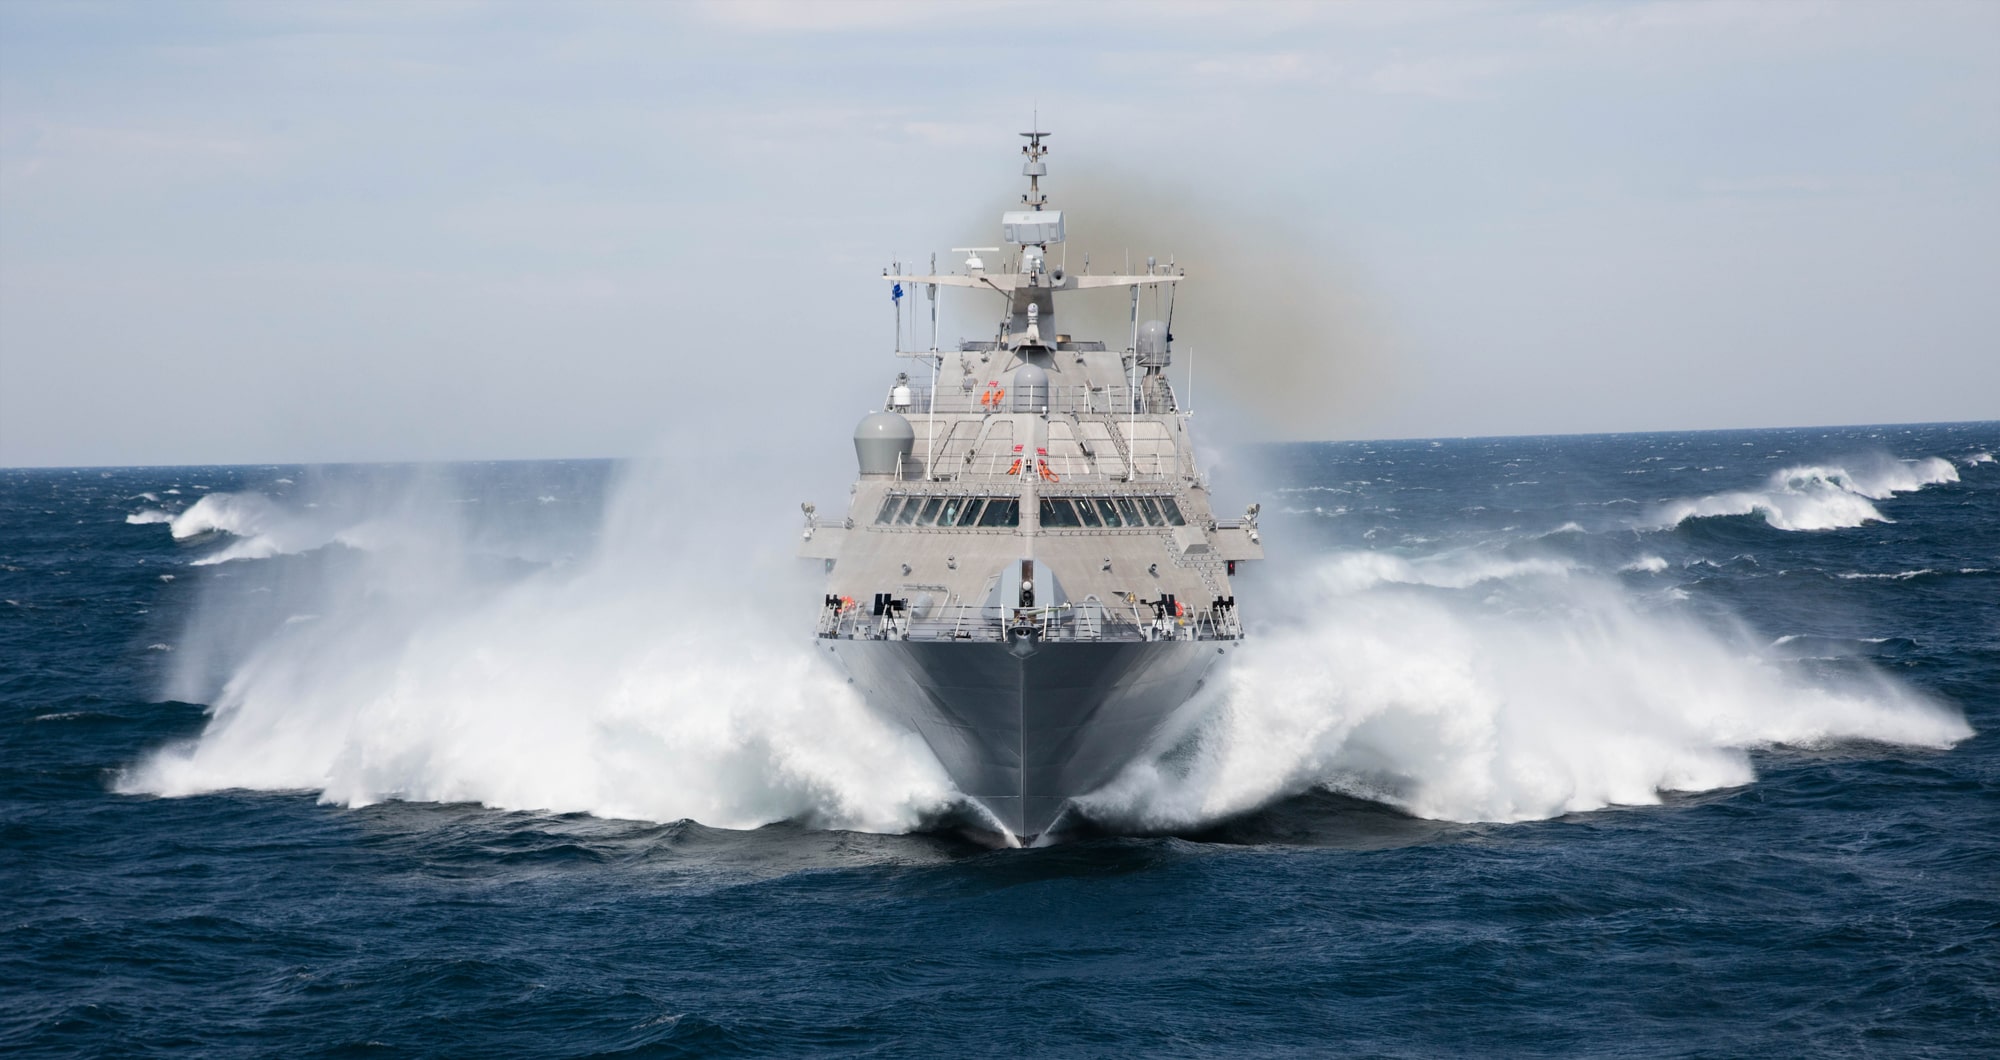 USS Milwaukee (LCS-5) sets sail in open waters. It sprays ocean water mist from its sides as it moves forward.